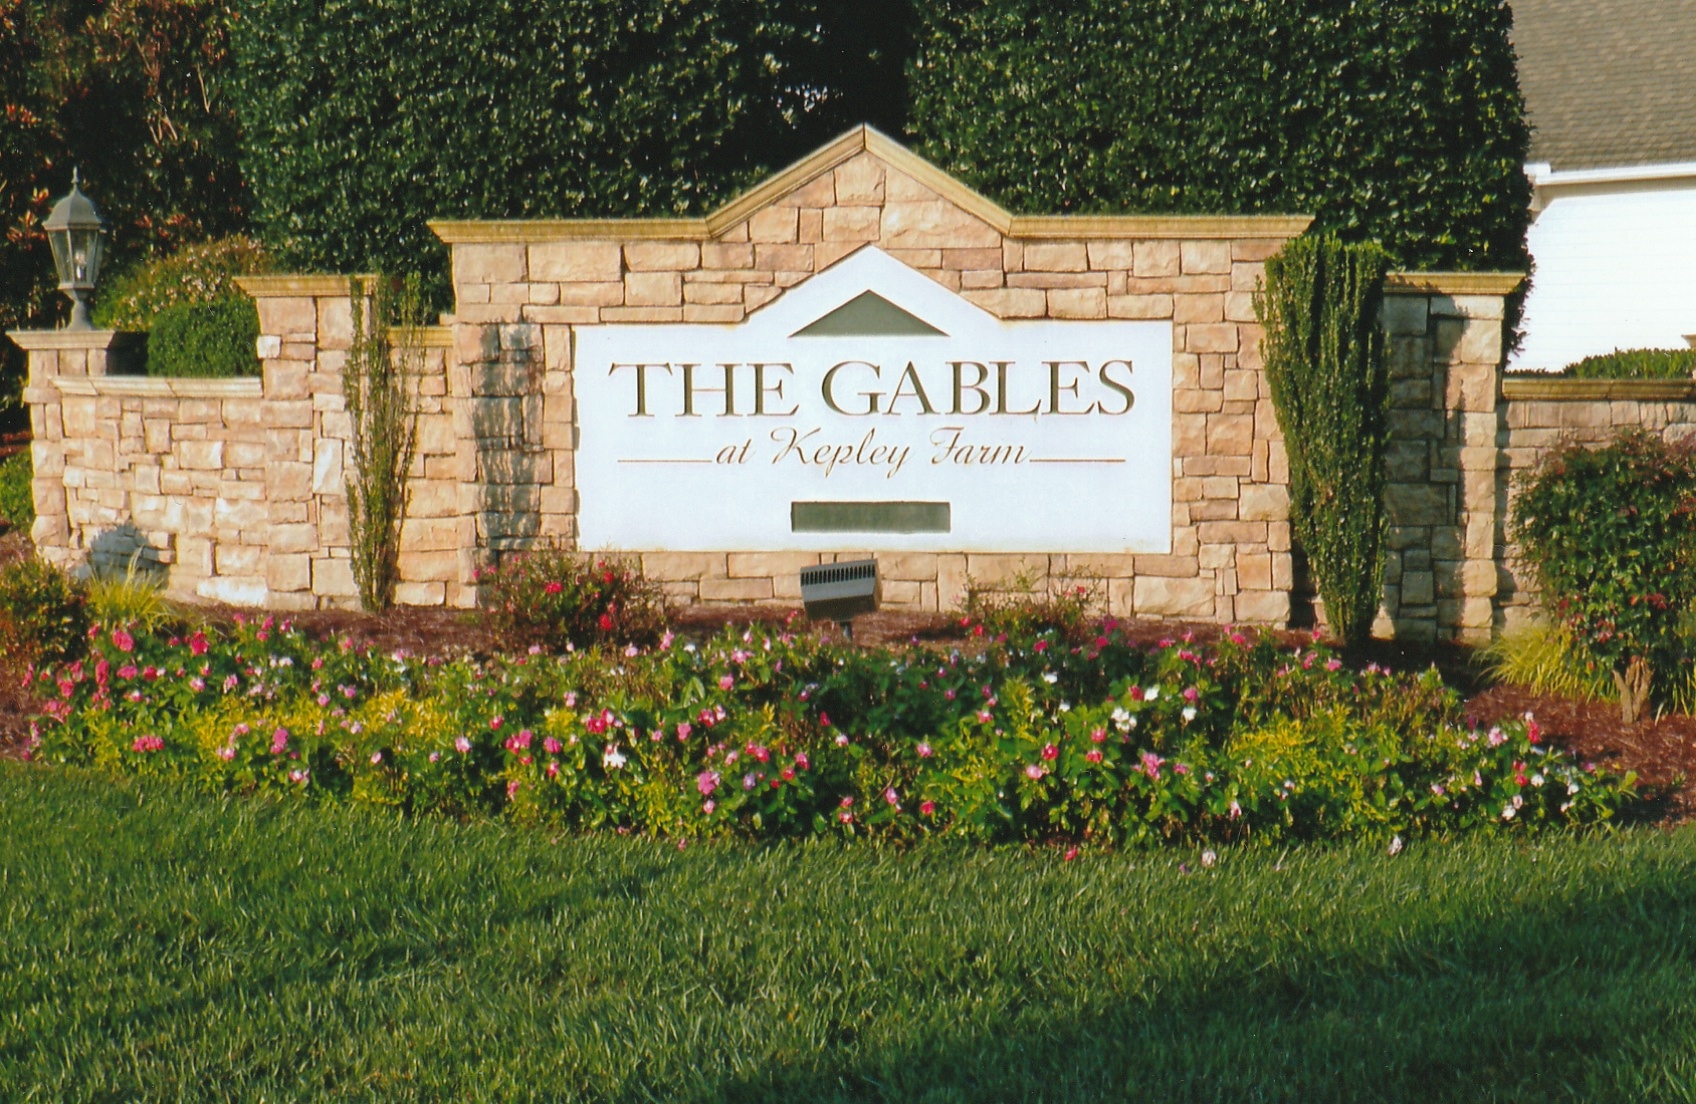 Second Place:  "The Gables in Summer," by Tony McDowell thumbnail